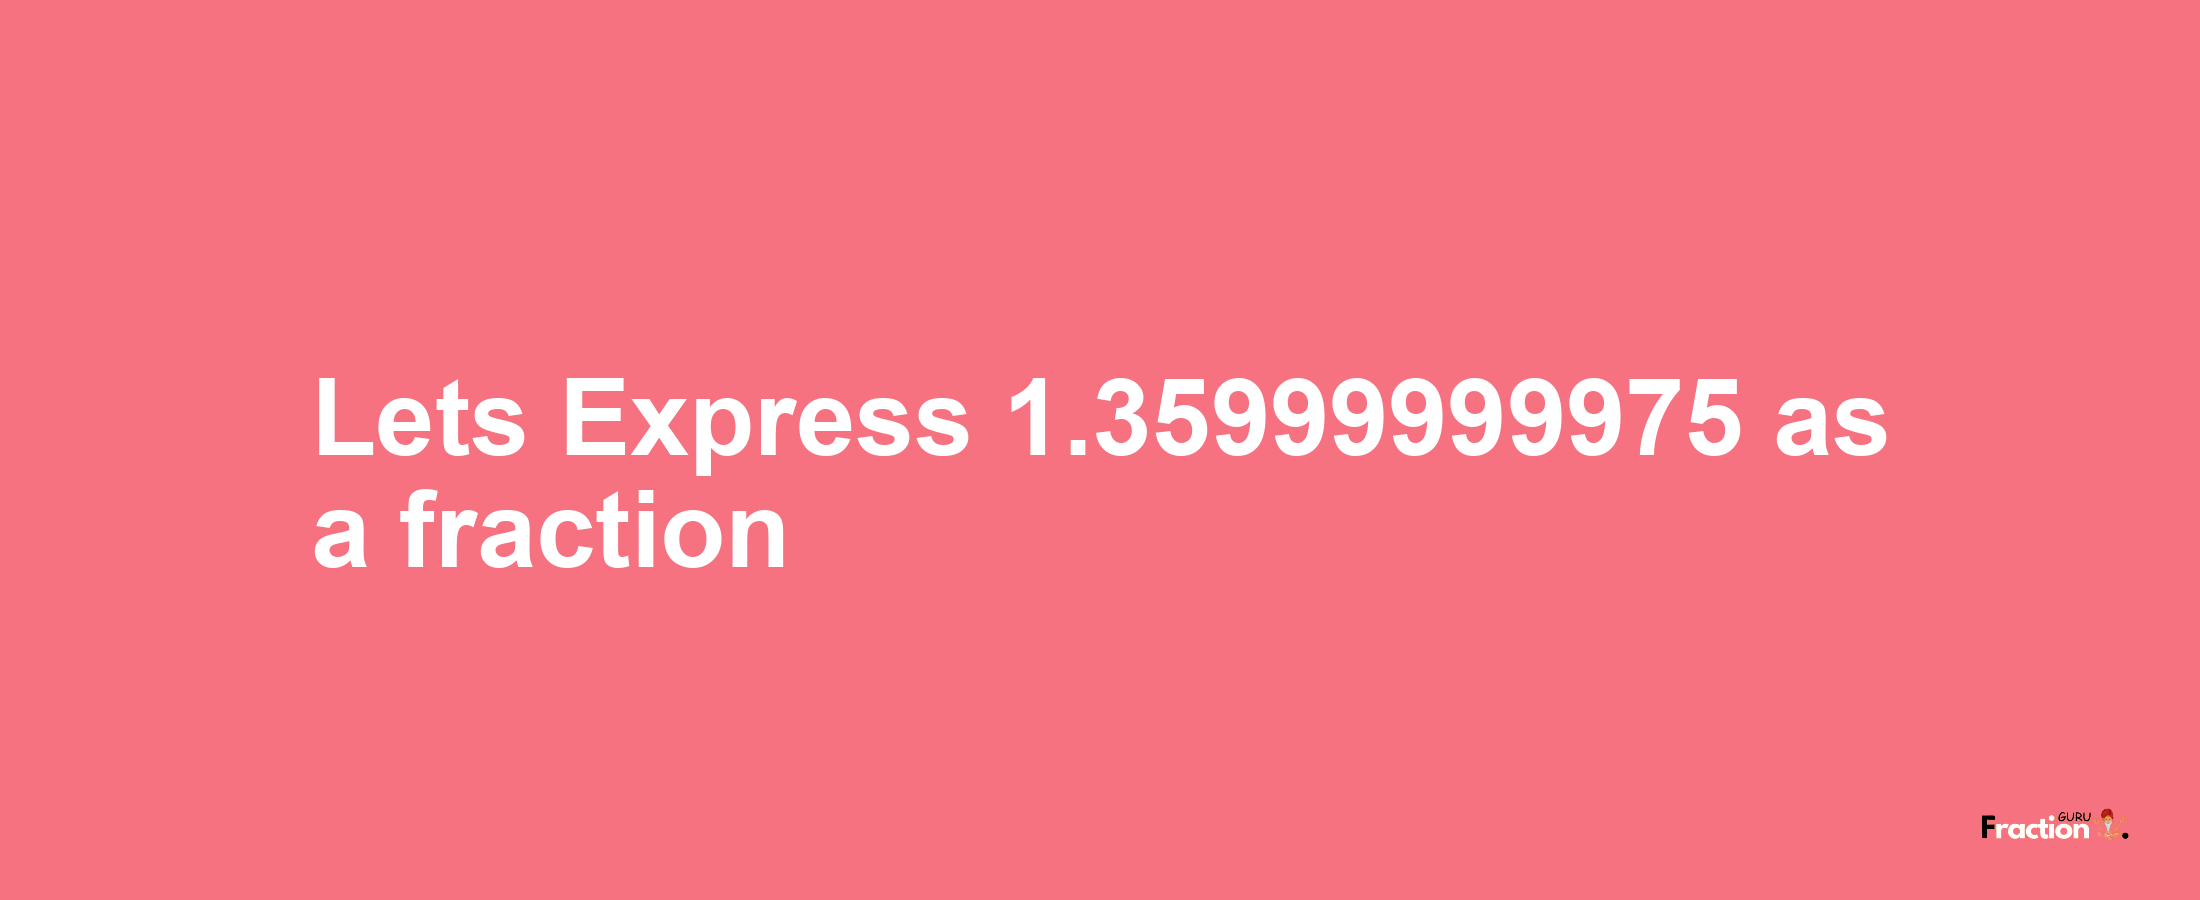 Lets Express 1.35999999975 as afraction